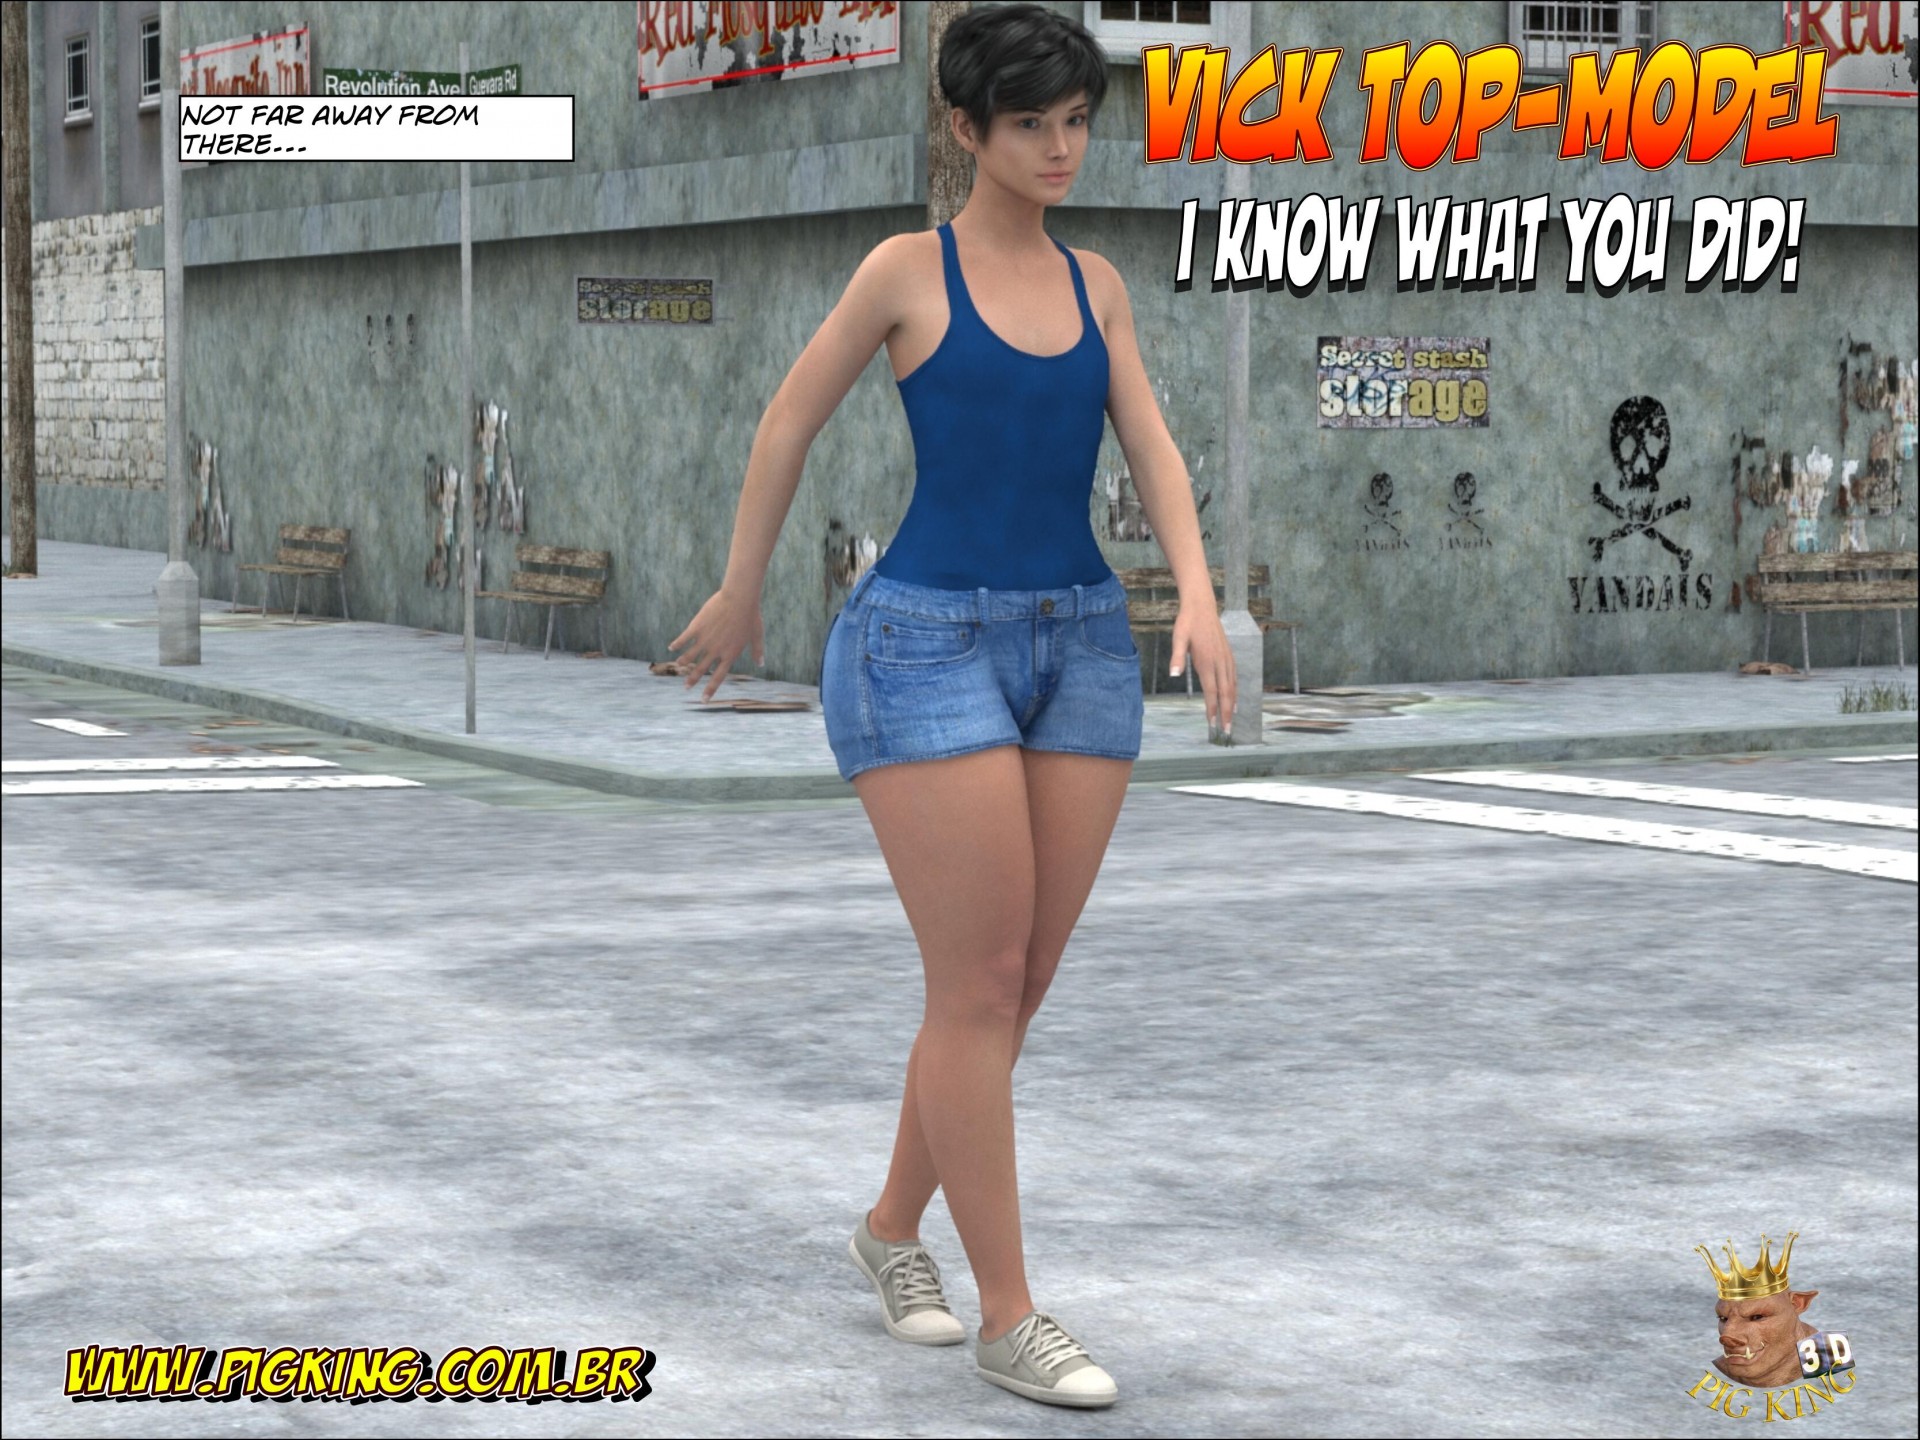 PigKing - Vick Top Model 2 - I Know What You Did 3D Porn Comic